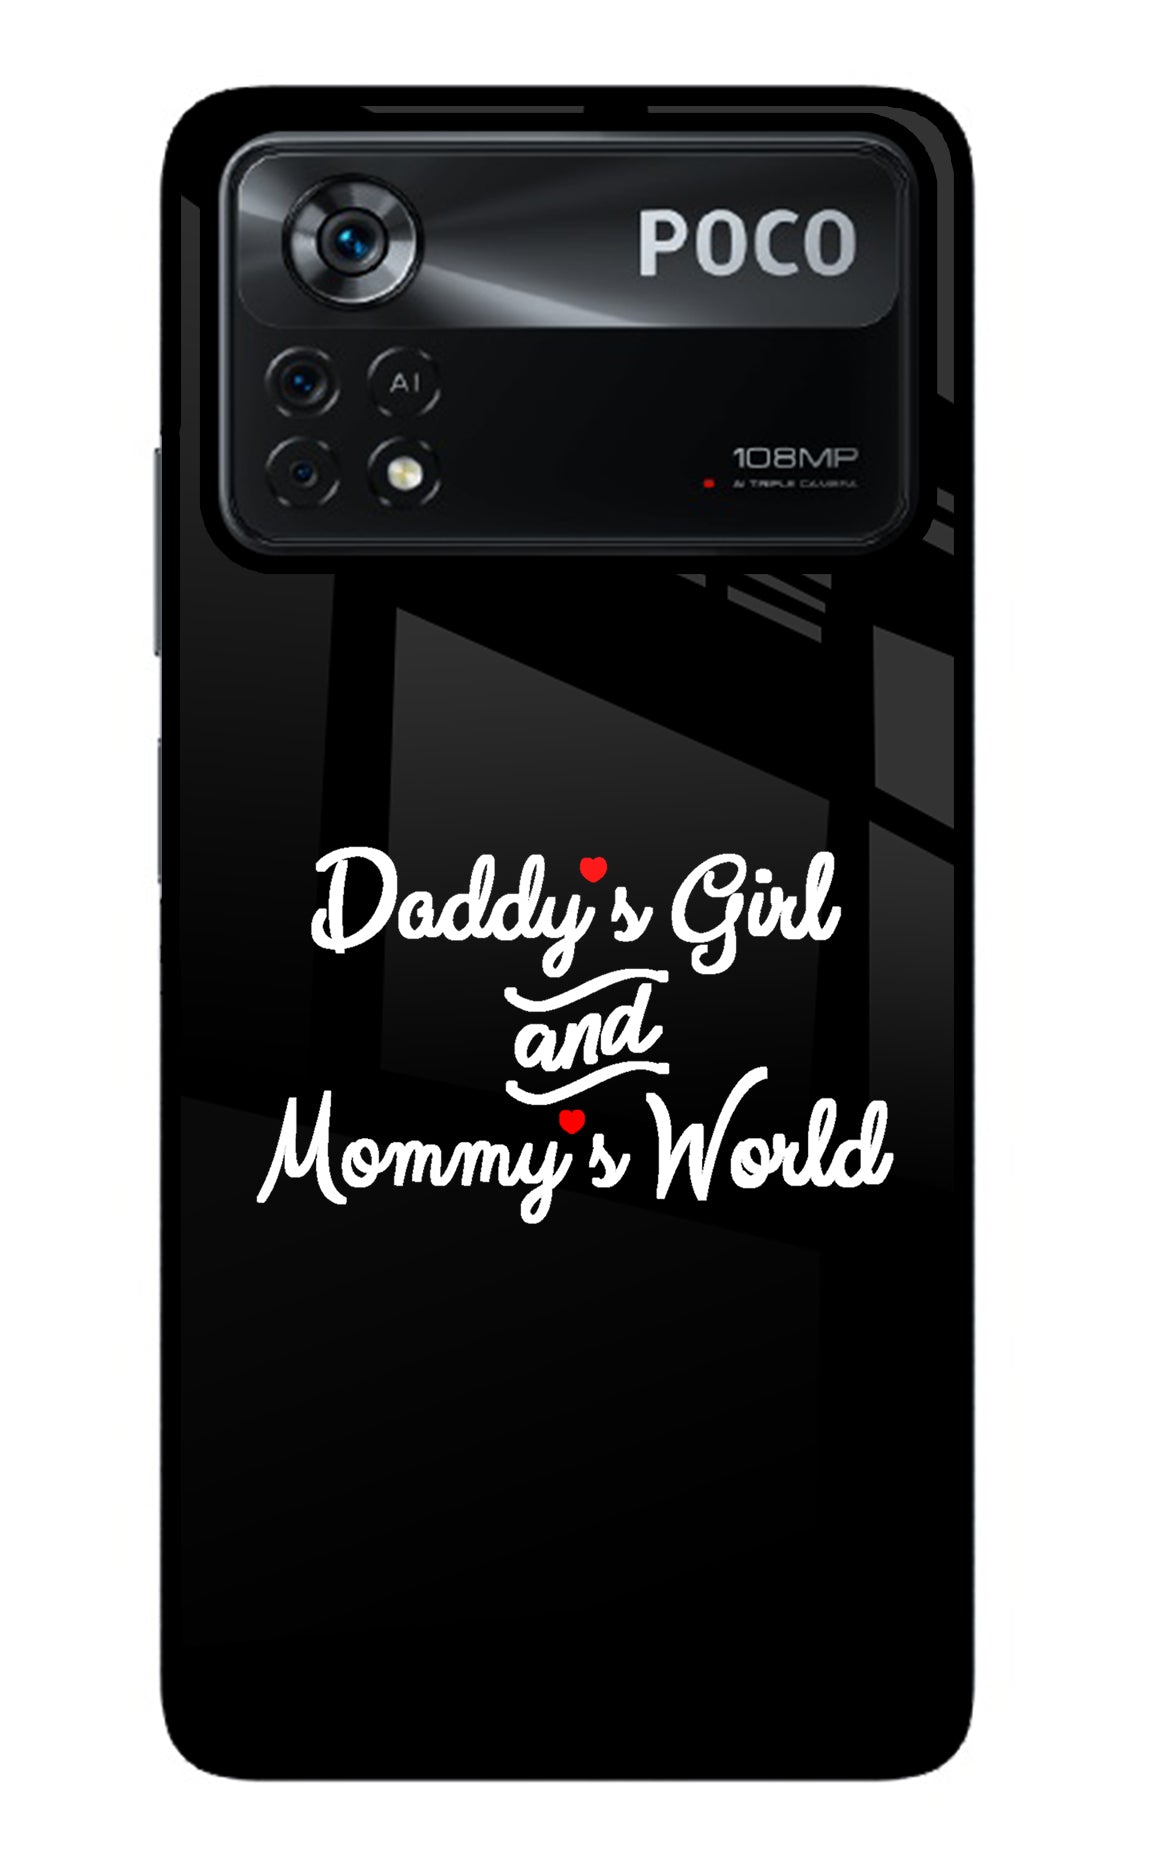 Daddy's Girl and Mommy's World Poco X4 Pro Glass Case